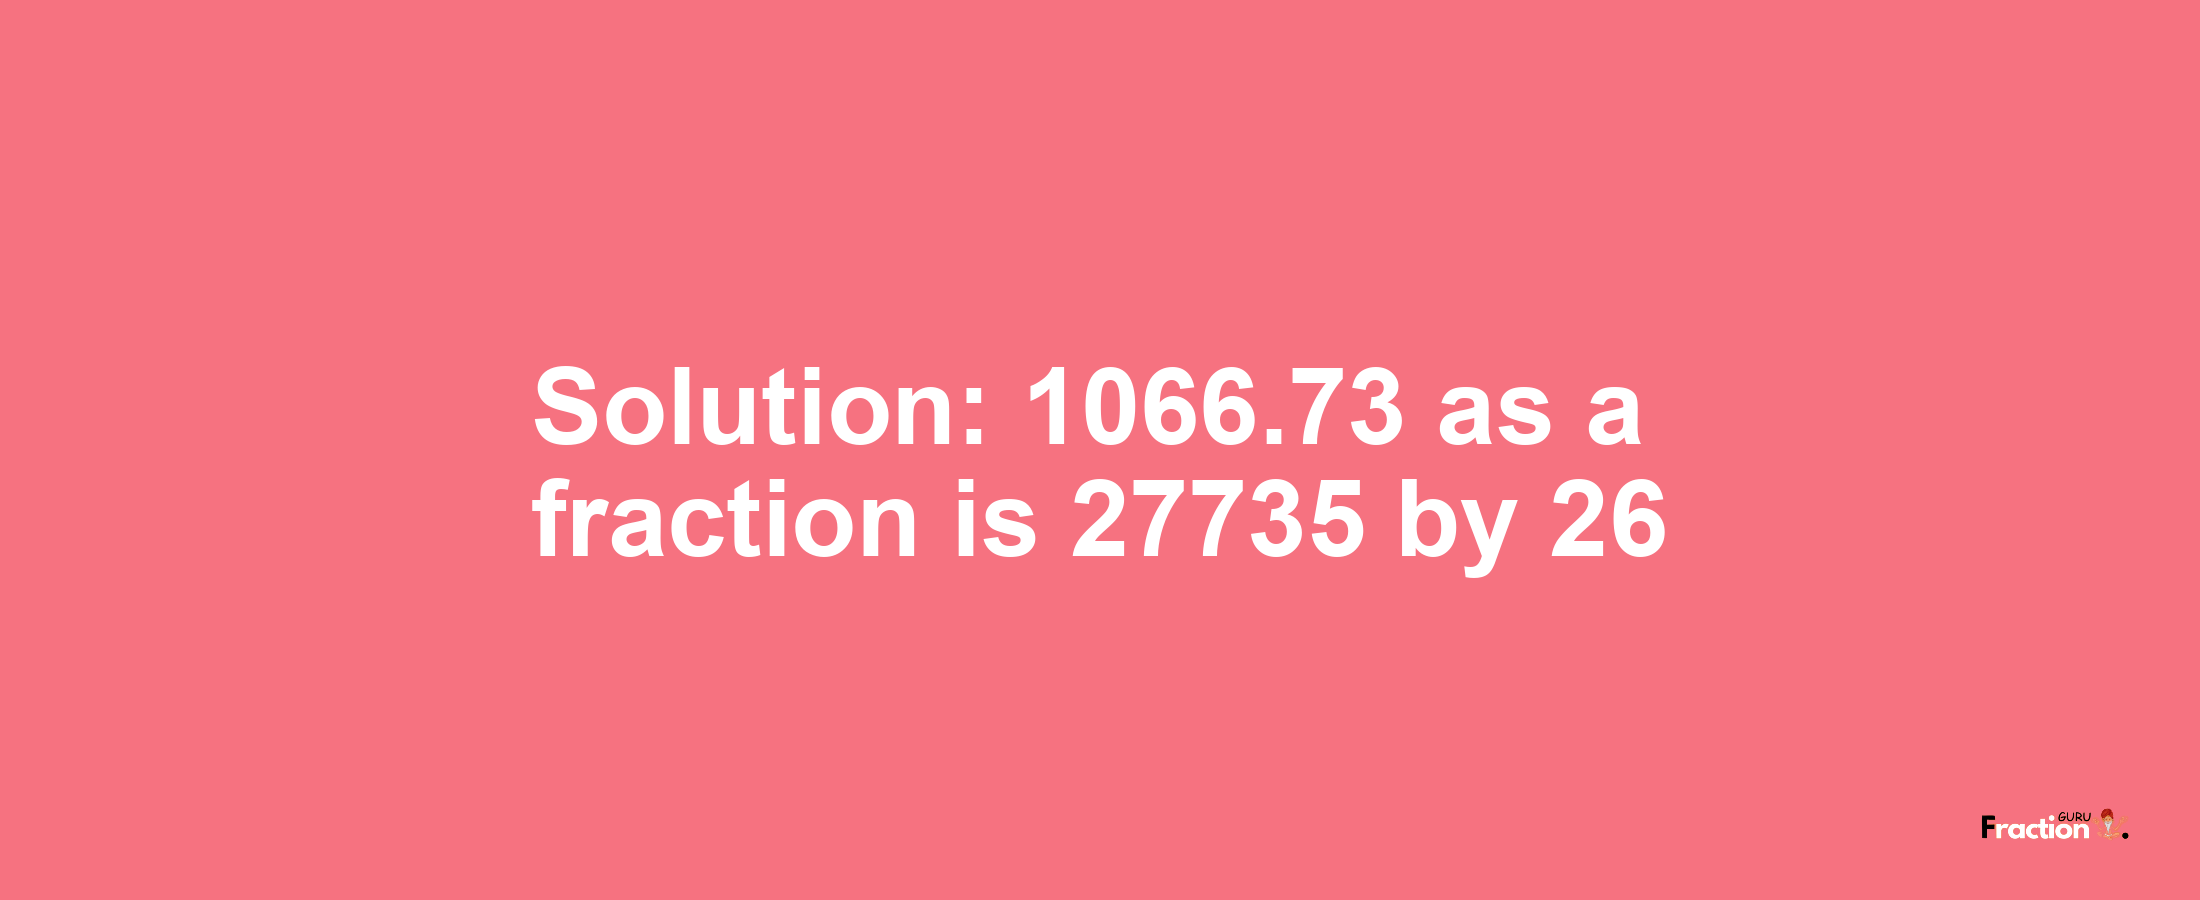 Solution:1066.73 as a fraction is 27735/26